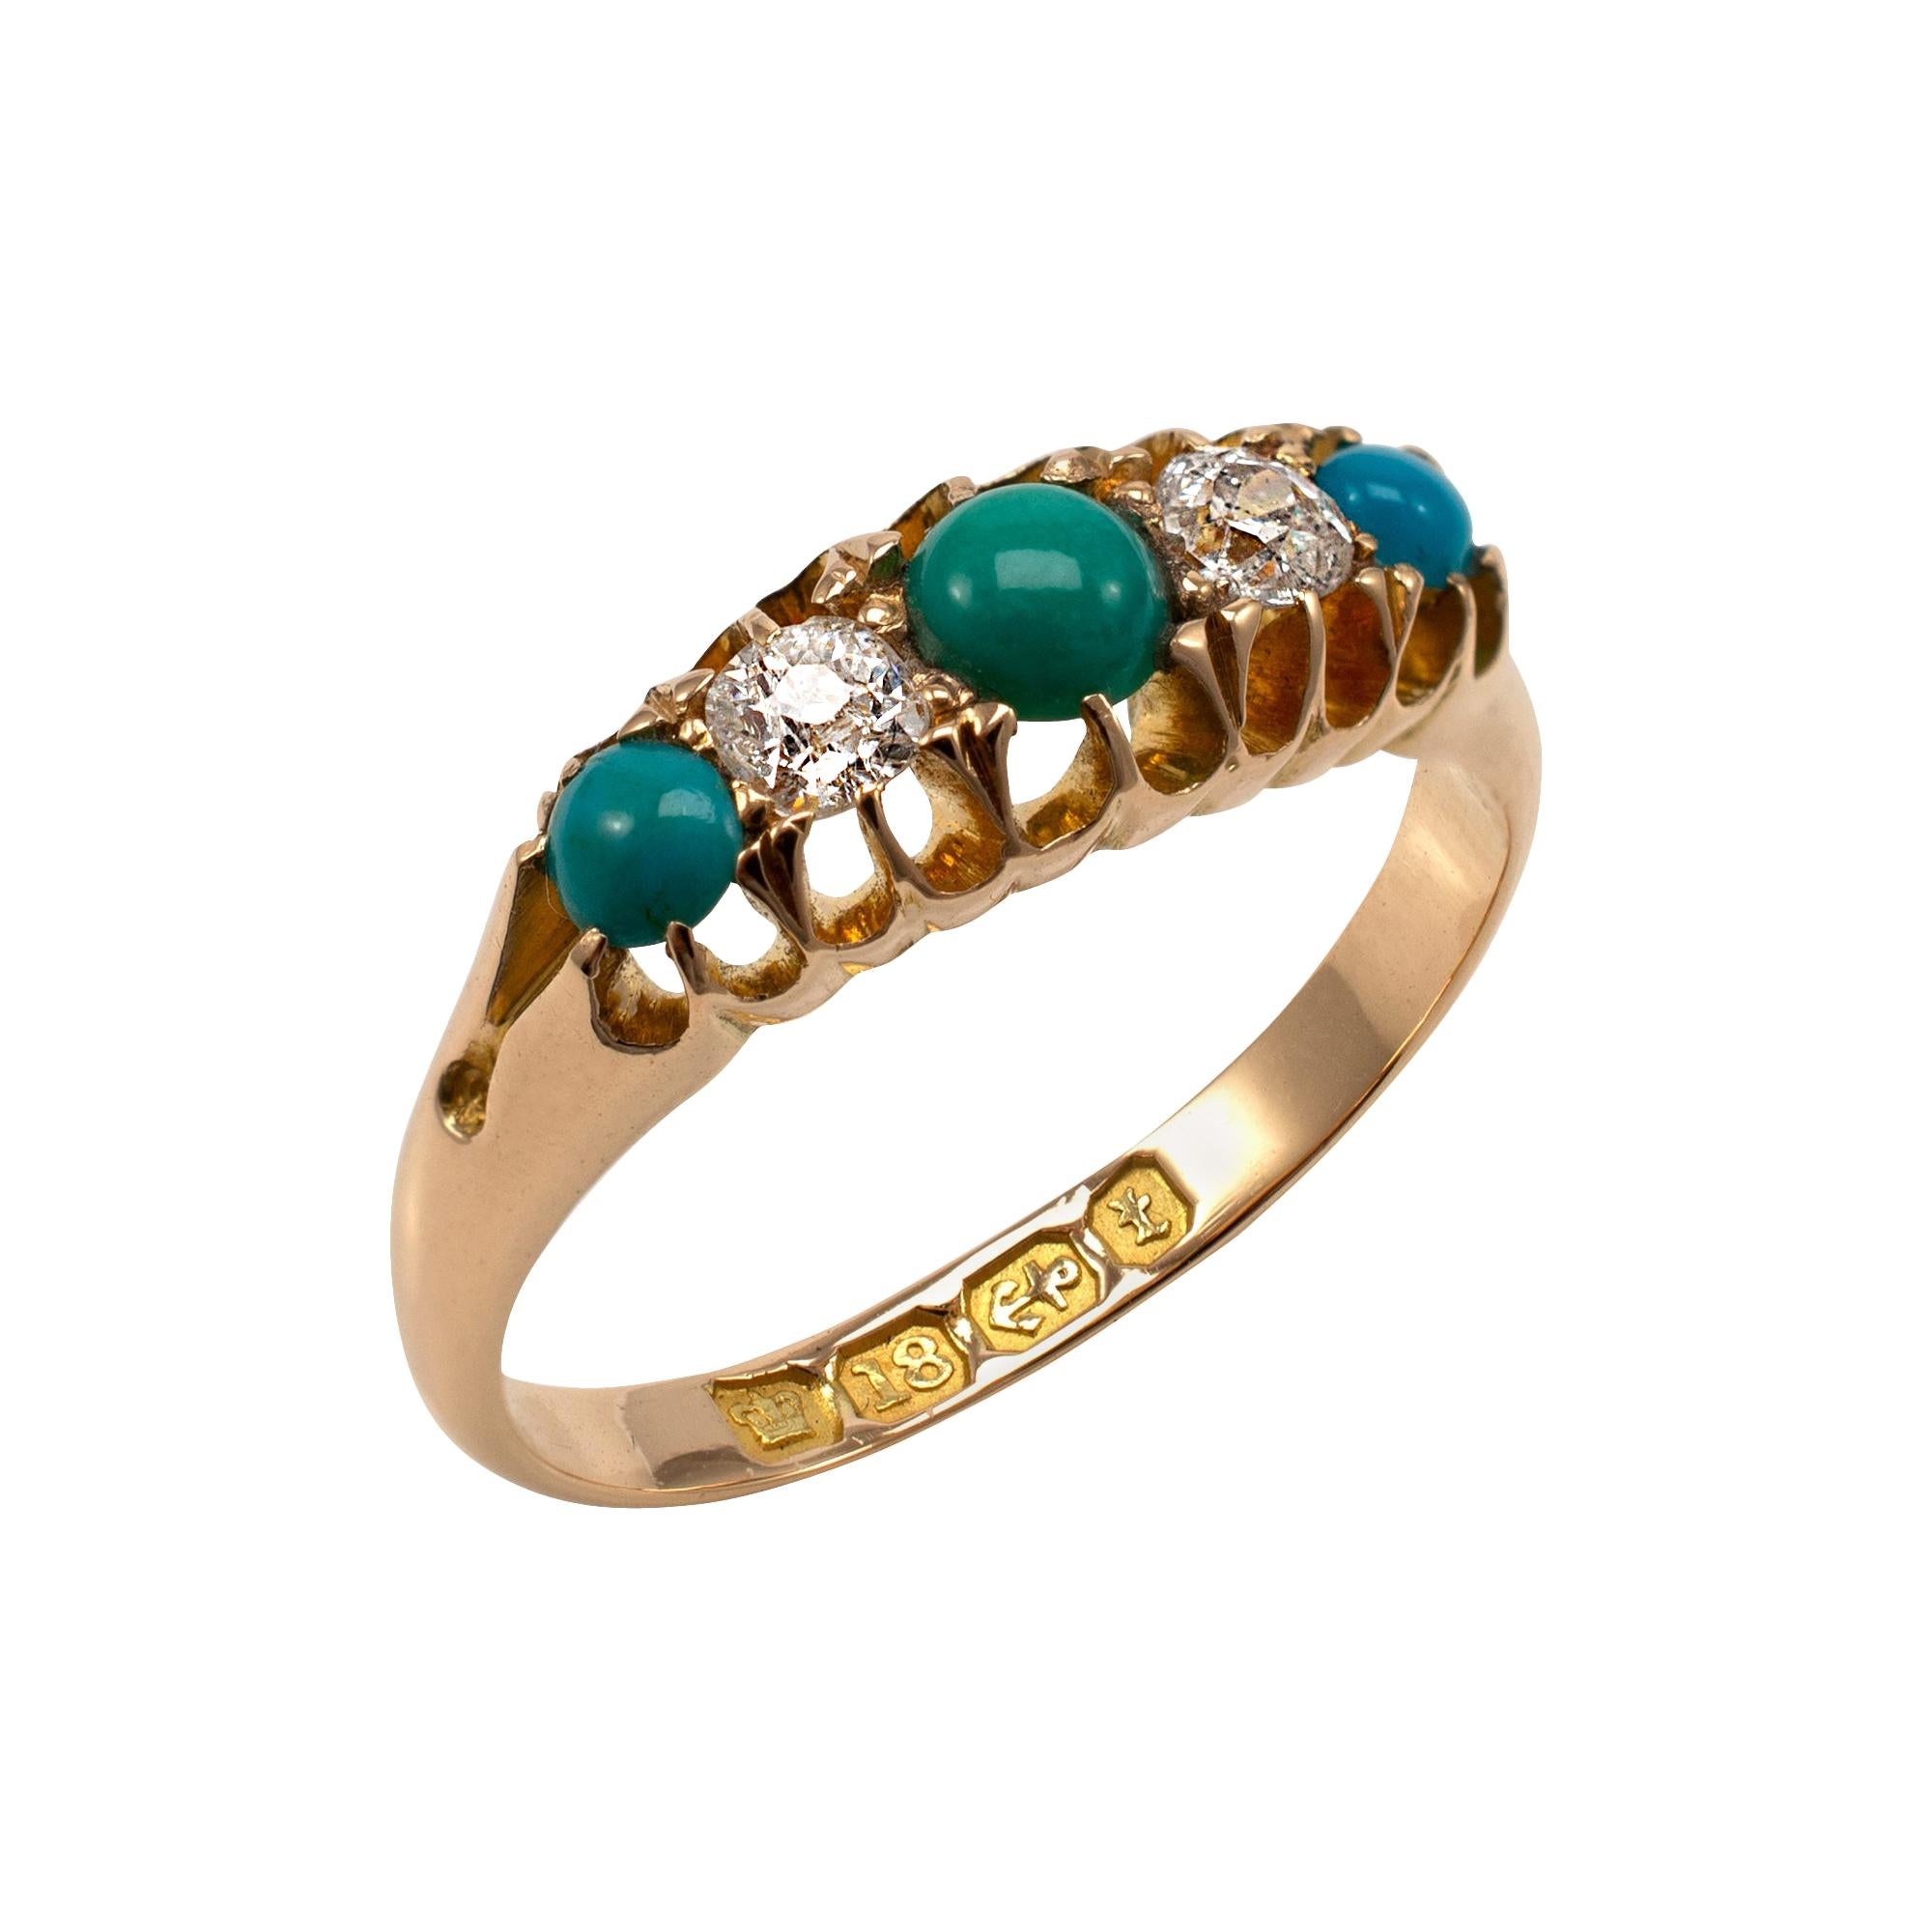 Antique Turquoise and Diamond Boat Shape Ring 18 Karat Yellow Gold, Dated 1893